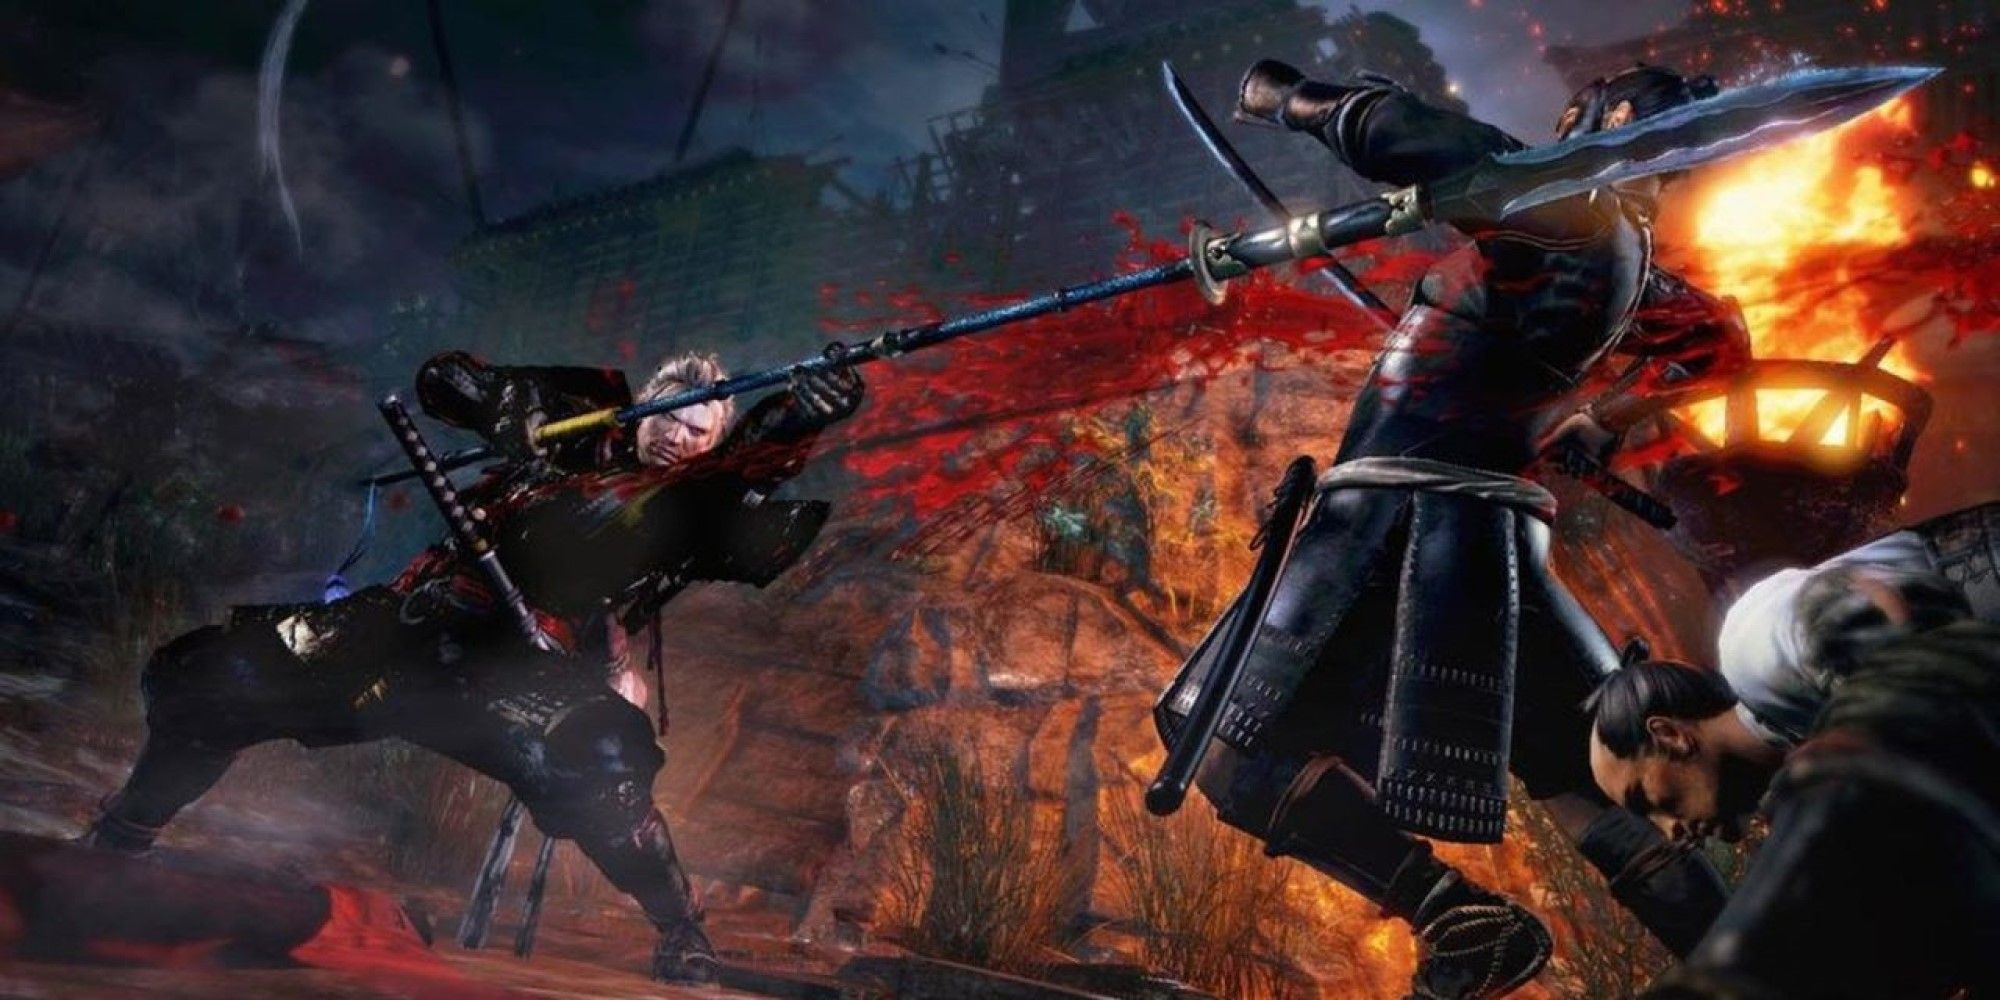 The player who attacks an enemy with a spear.